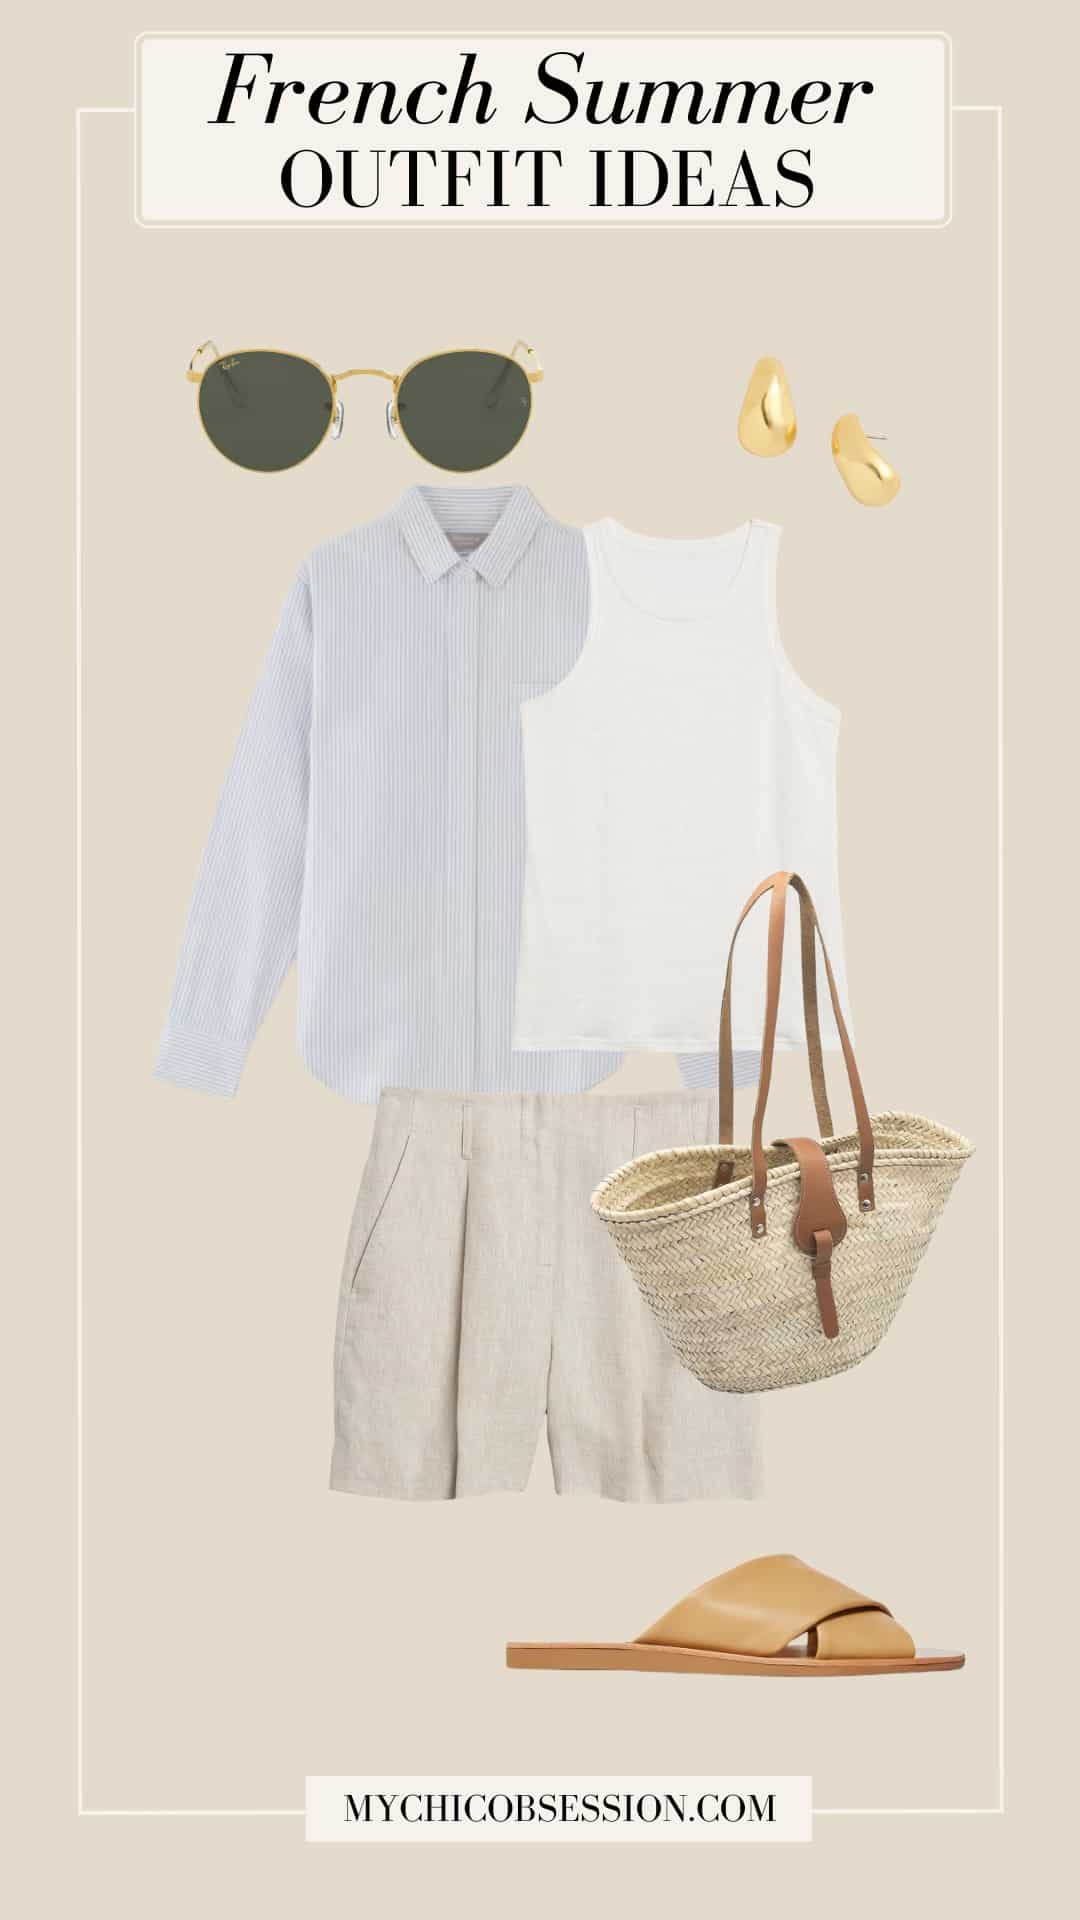 french summer outfit - sunglasses white tank top button down shirt linen shorts sandals